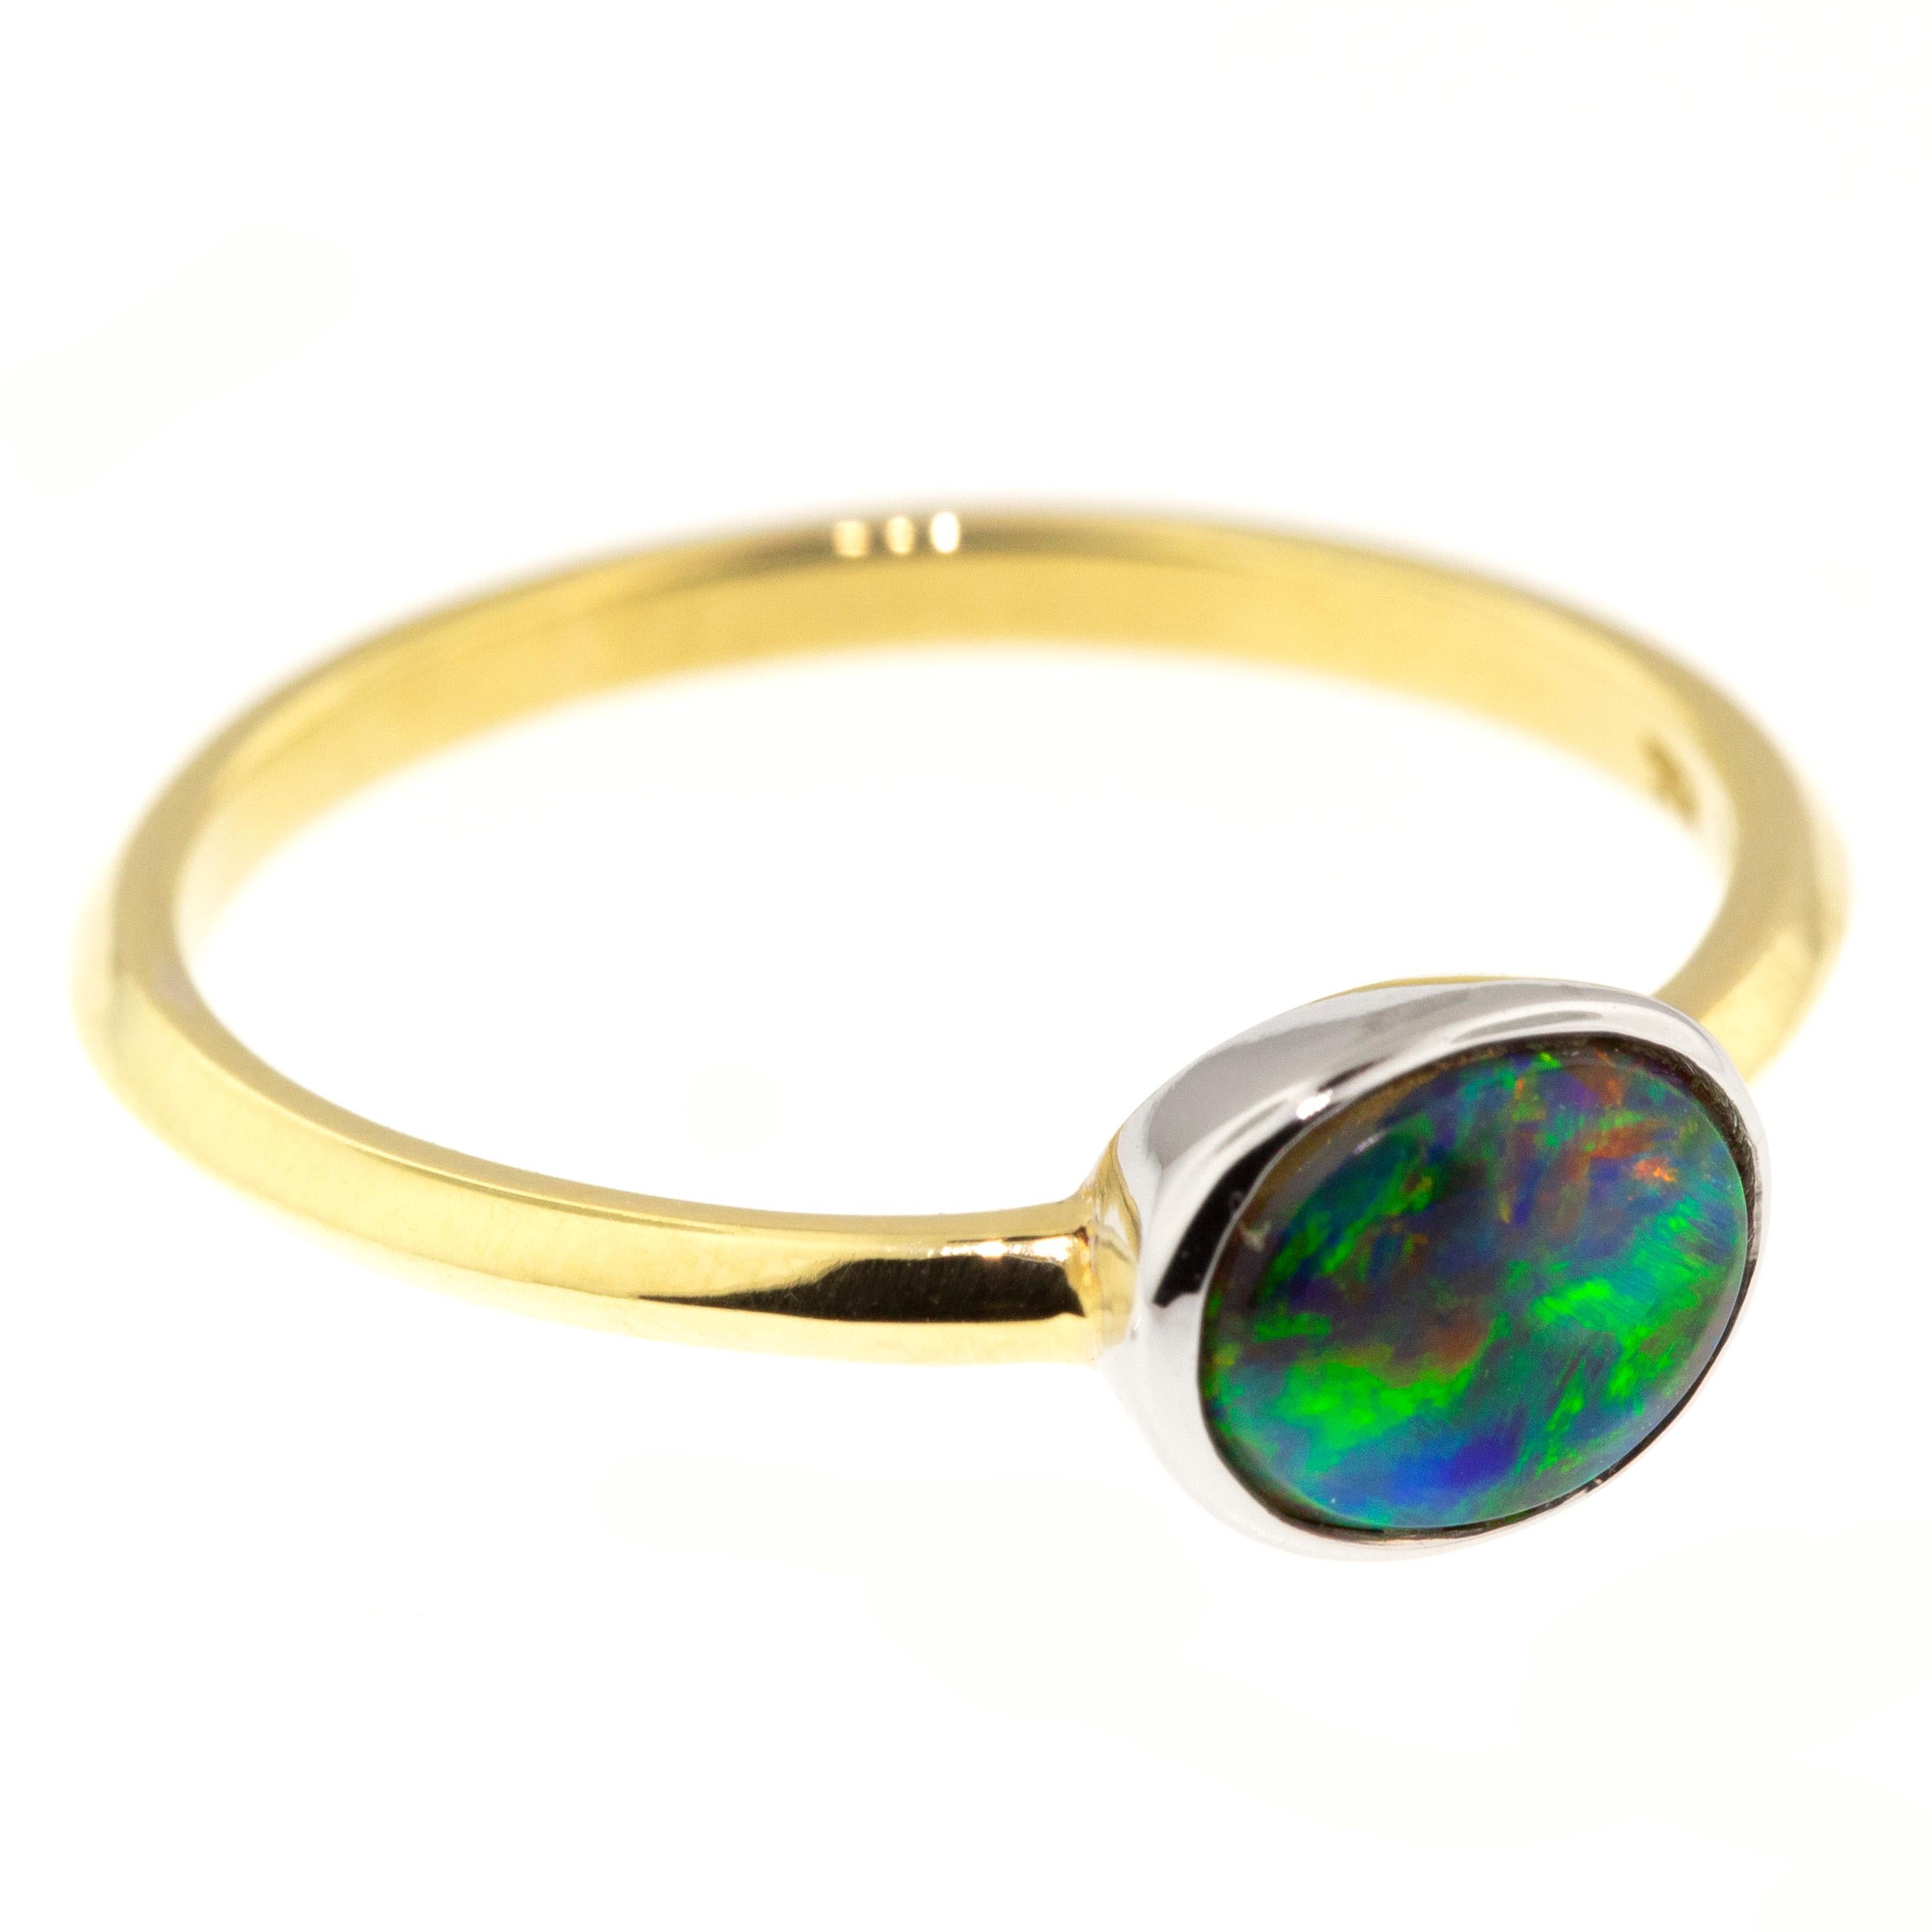 The colors of this brilliantly hued Australian black opal from Lightening Ridge have a painterly appearance, with strokes of saturated color popping from the dark background. 

